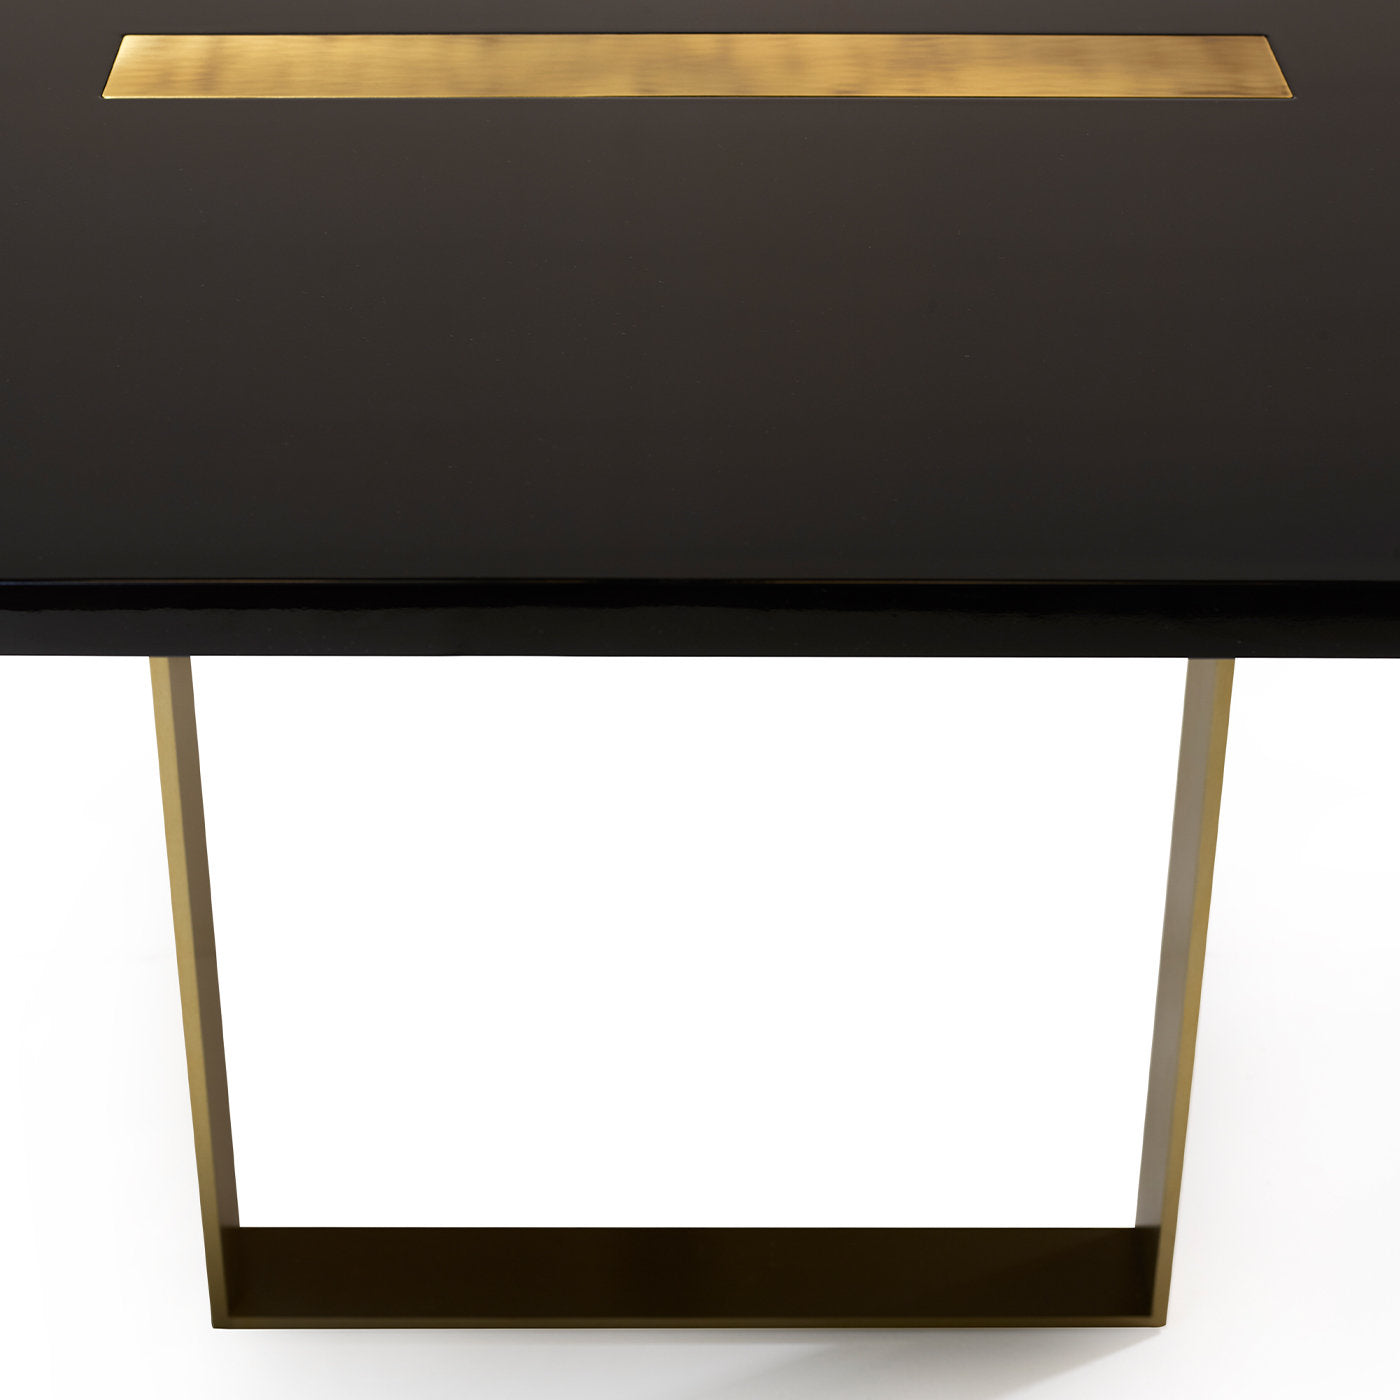 Tyron Dining Table - Alternative view 1